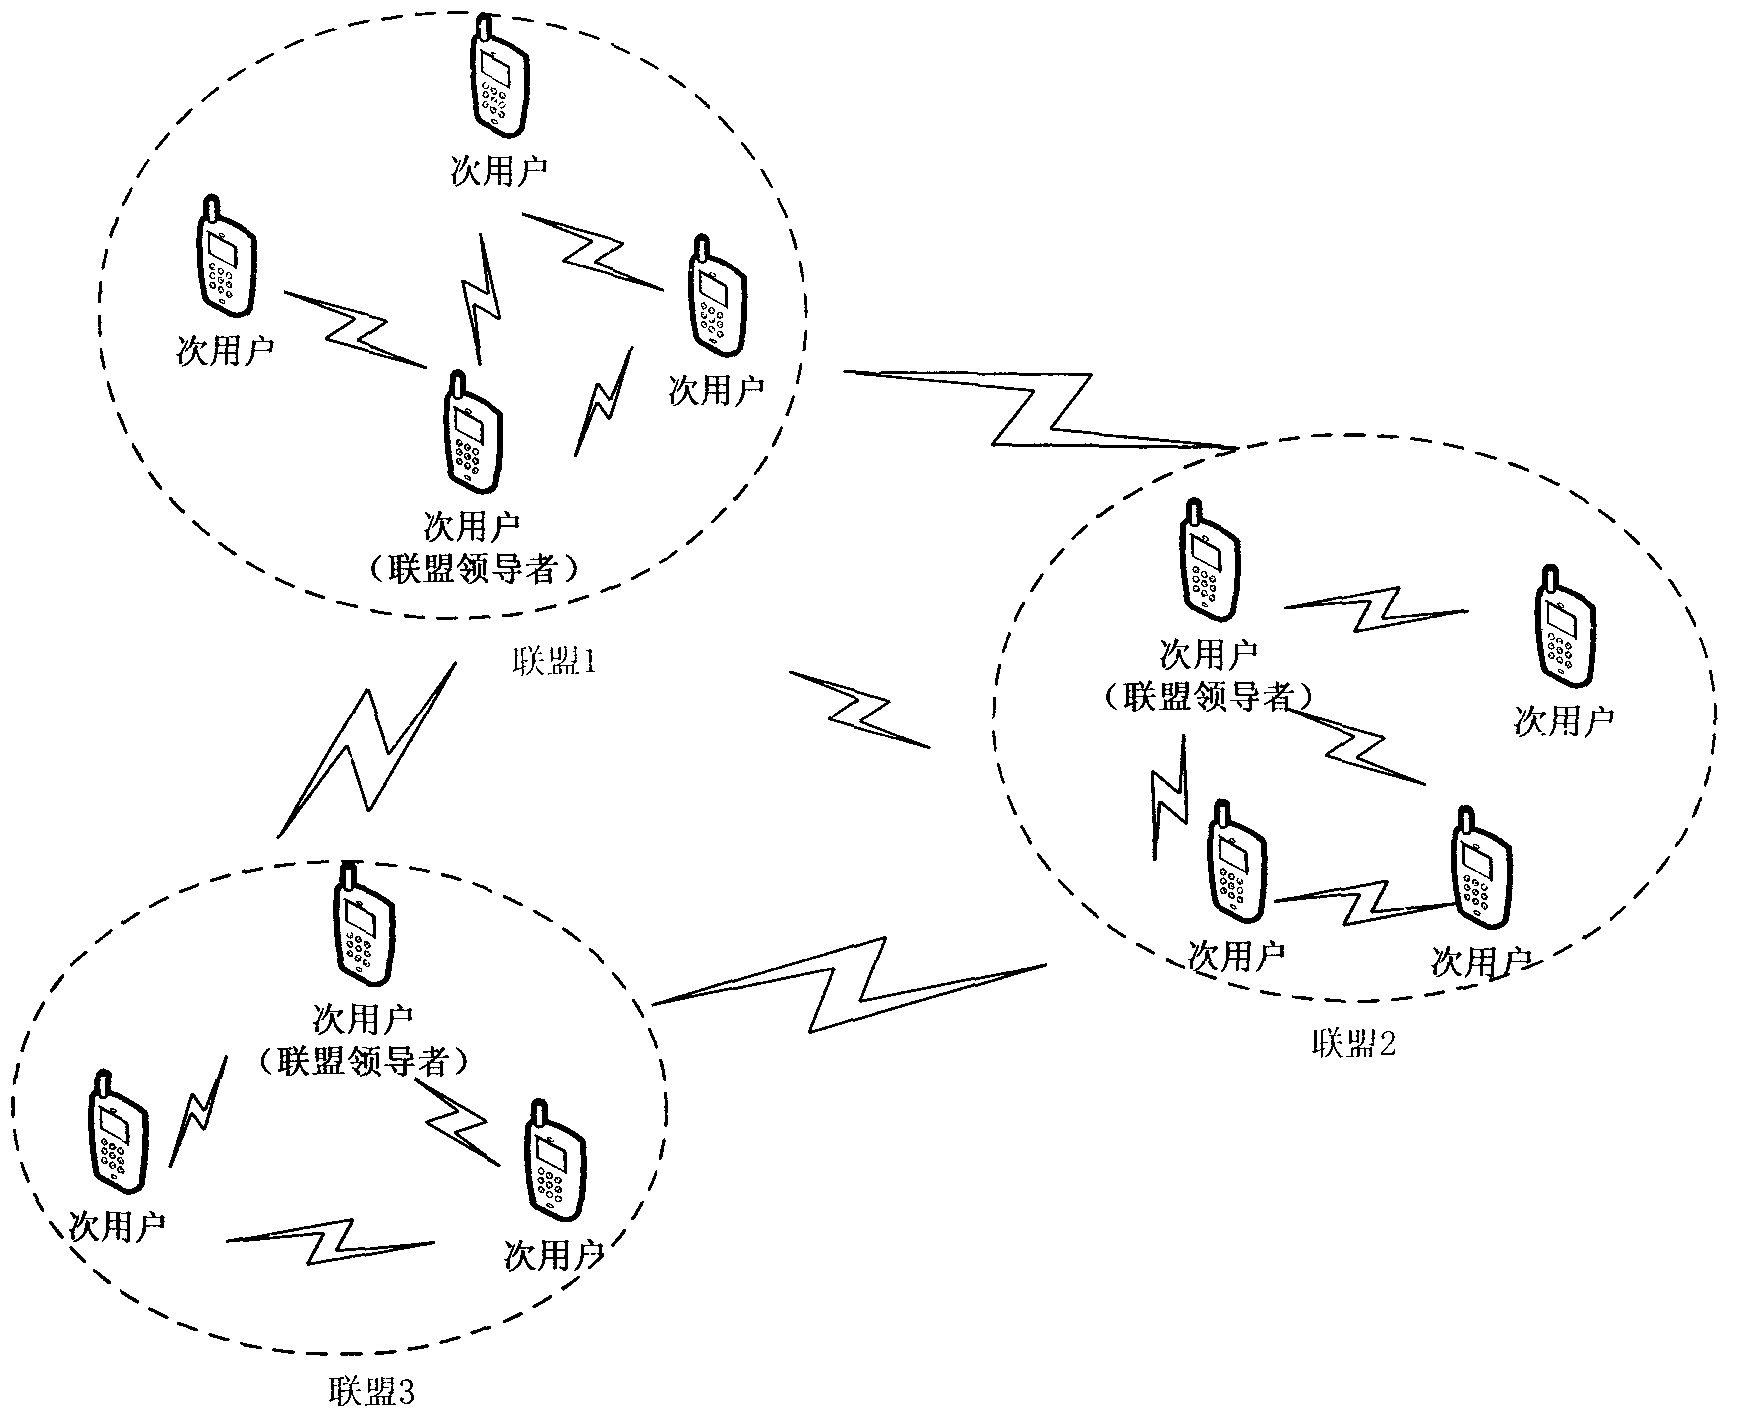 Distributed cognition wireless network spectrum allocation method based on coalition games